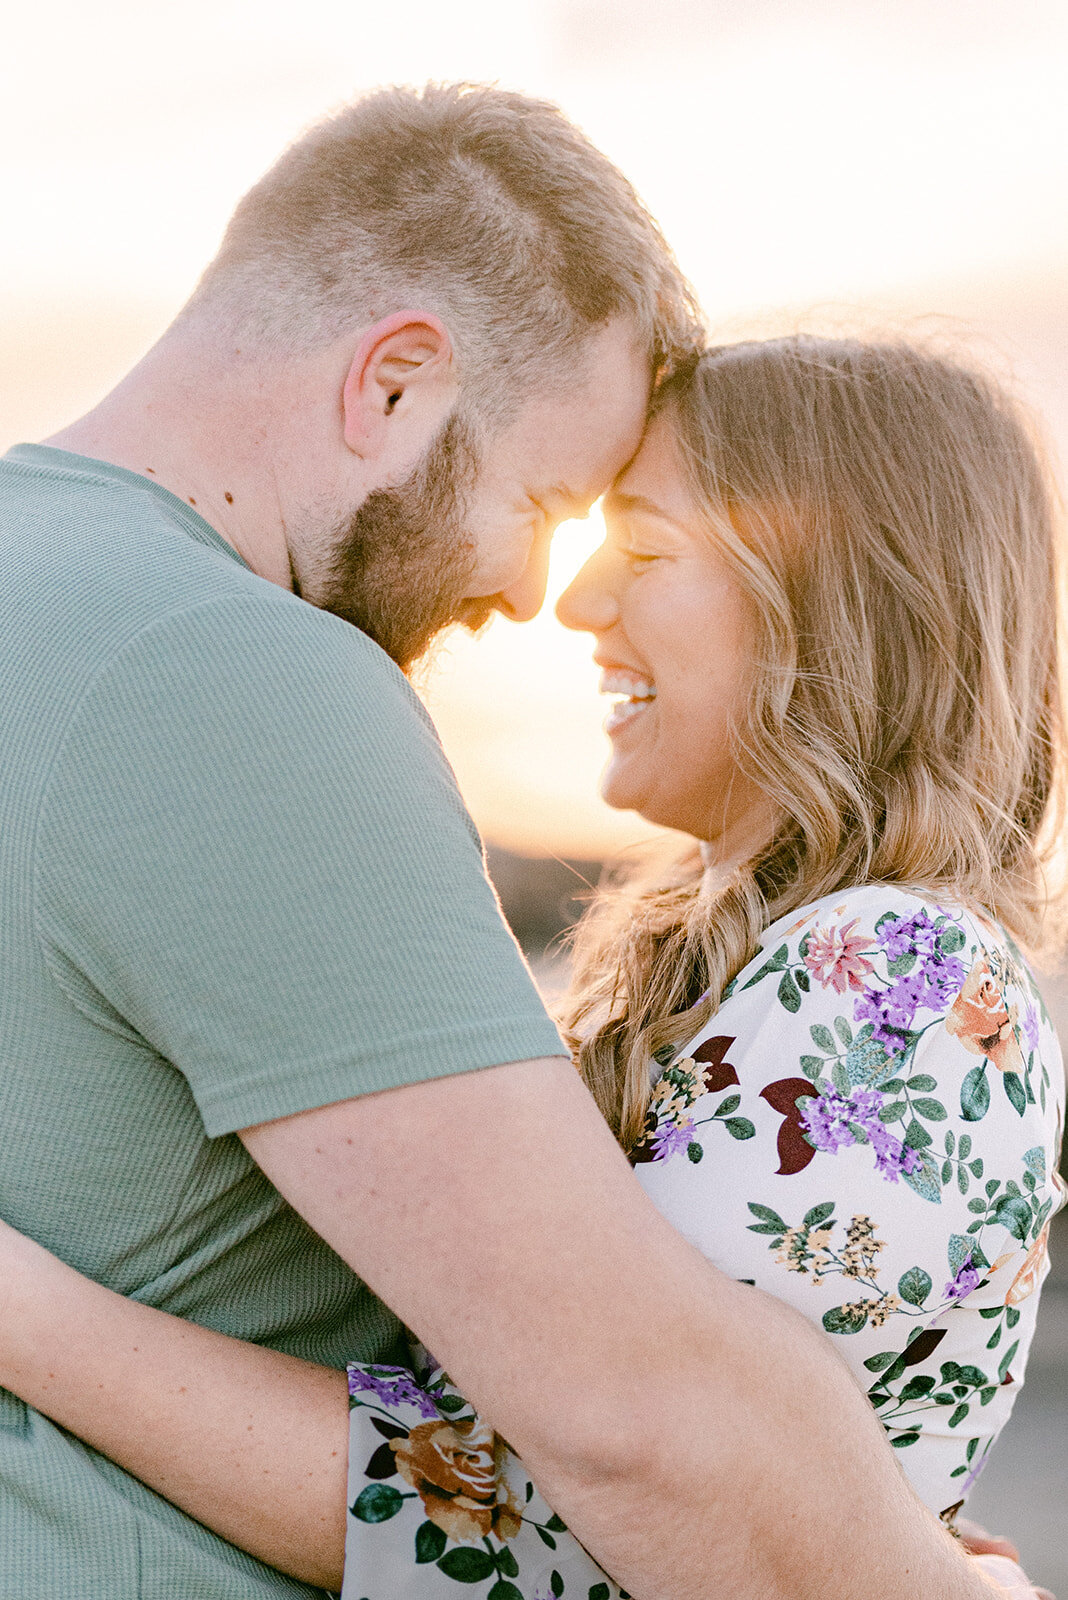 Sunrise engagement photoshoot at the beach, the couple have their foreheads together and are smiling at each other with the sun flaring between them